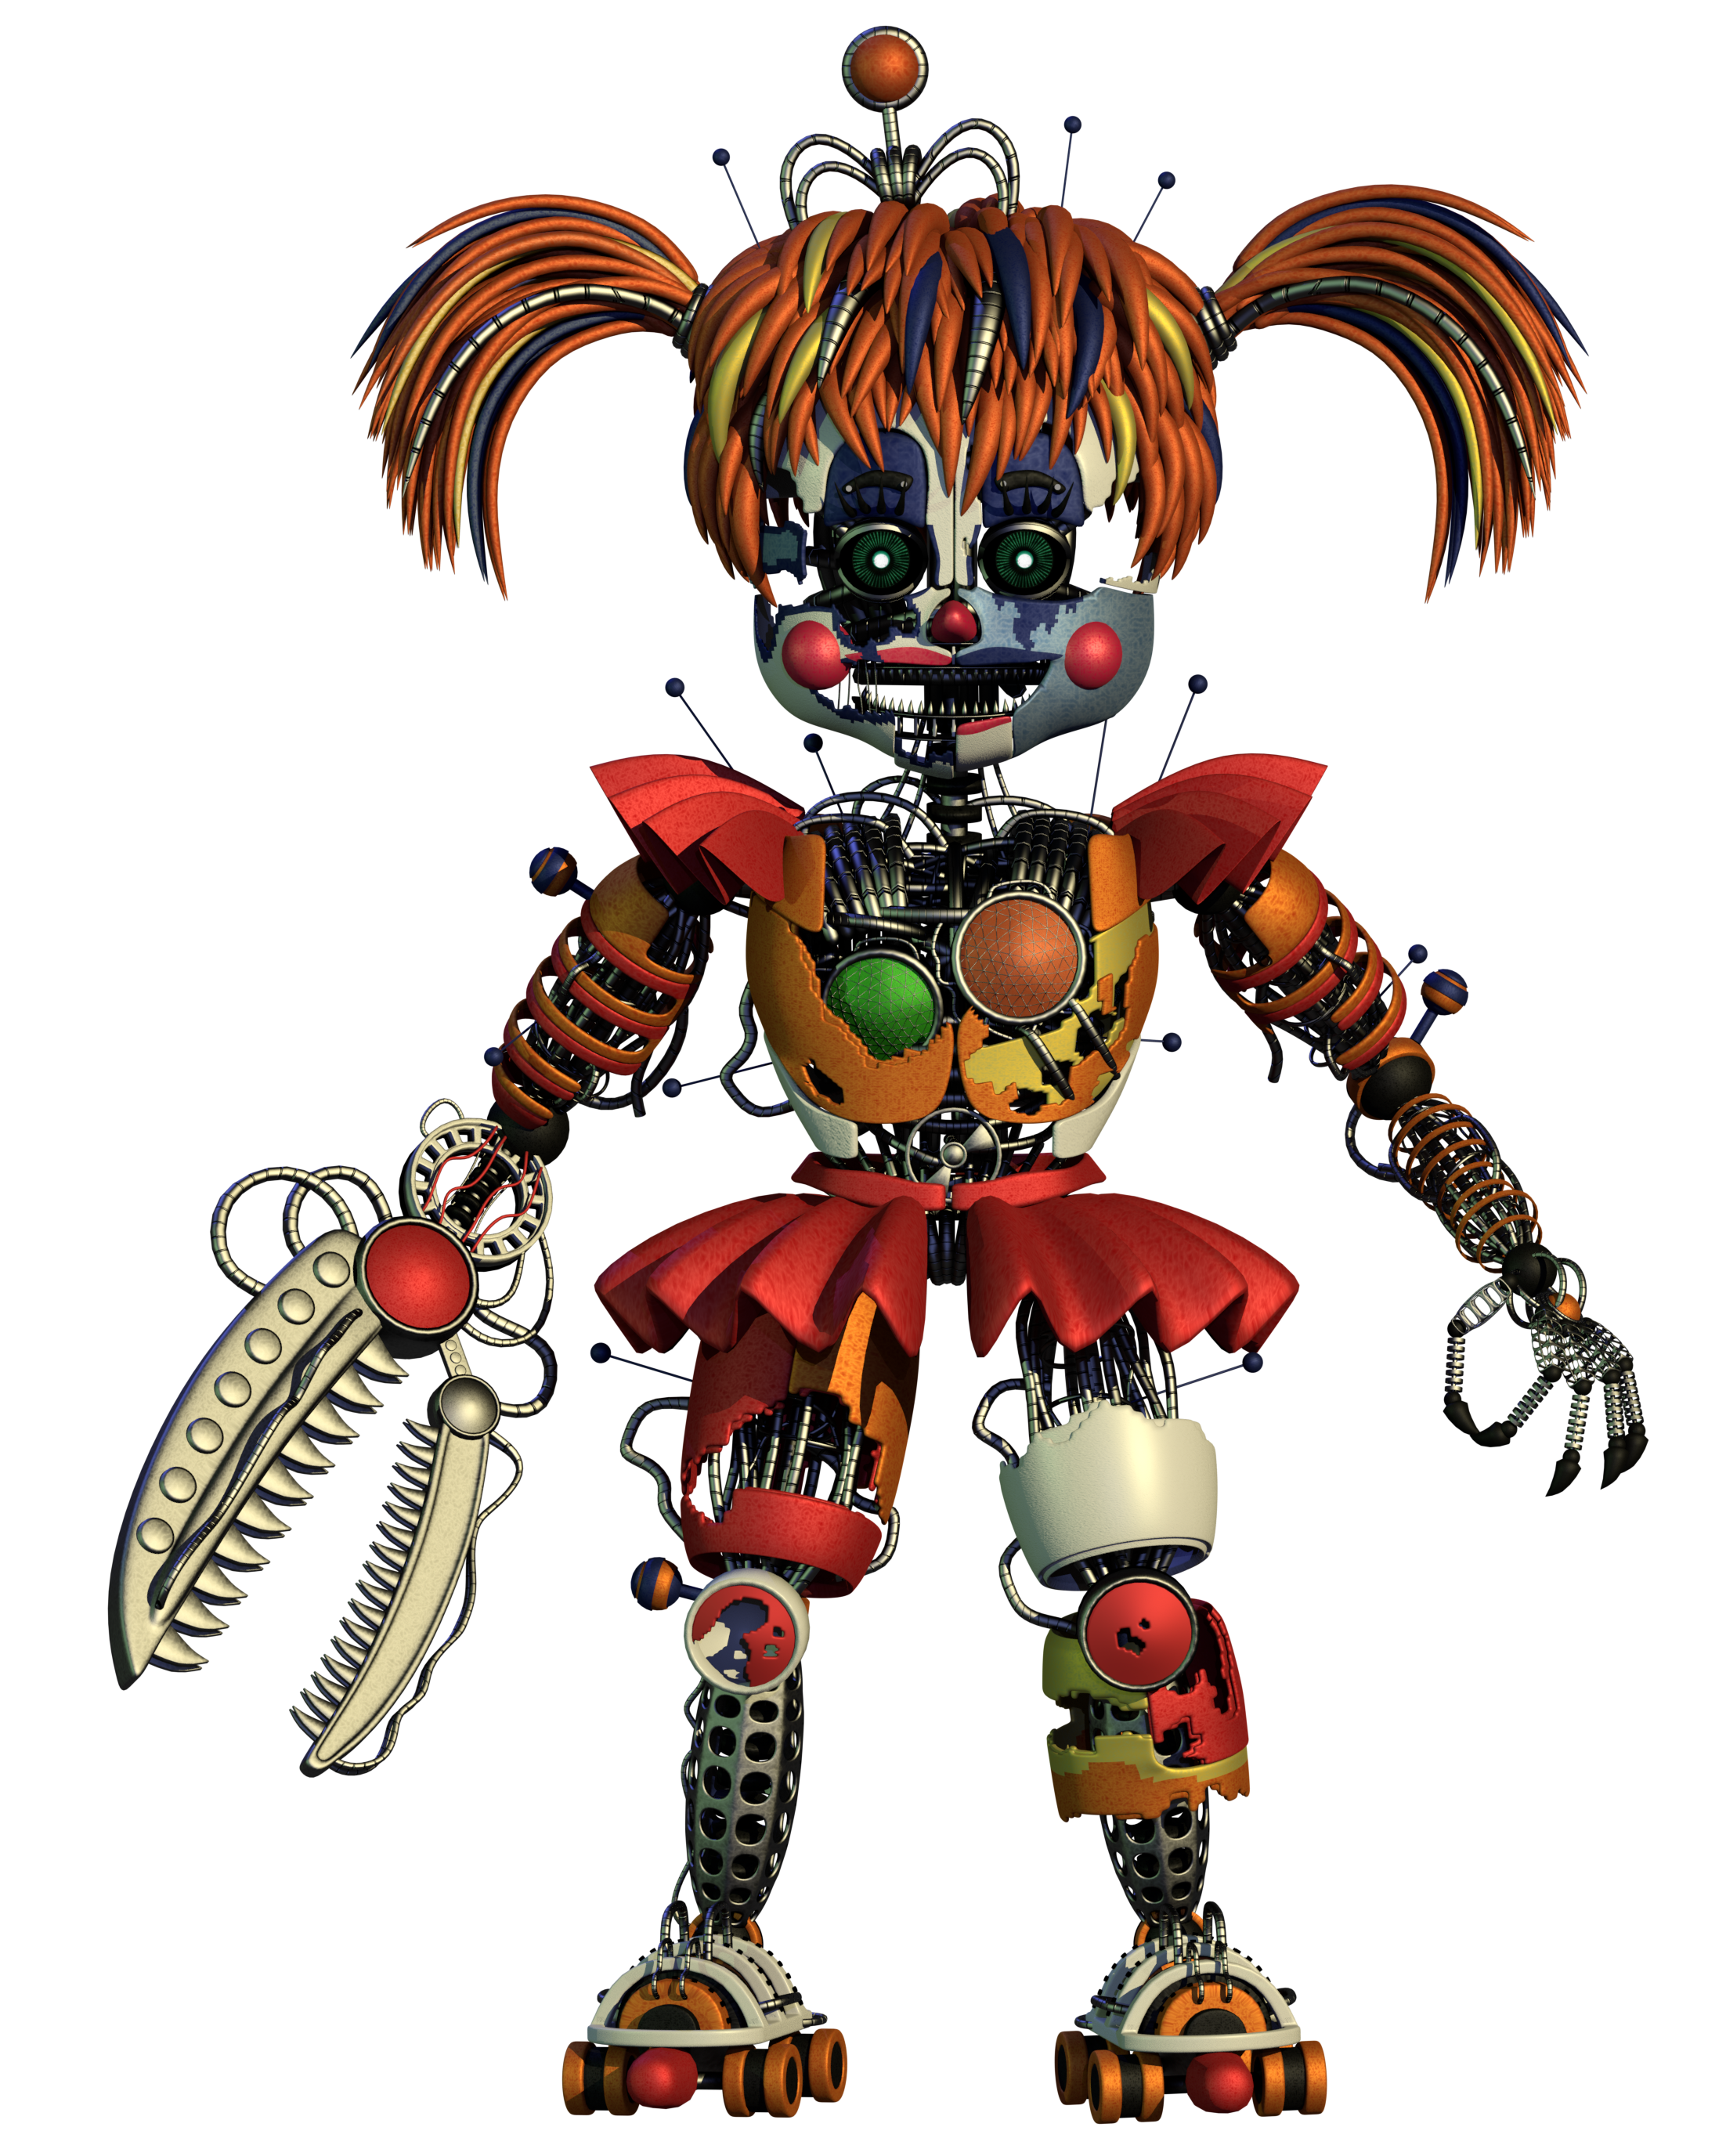 scrap baby updated by a1234agamer on deviantart